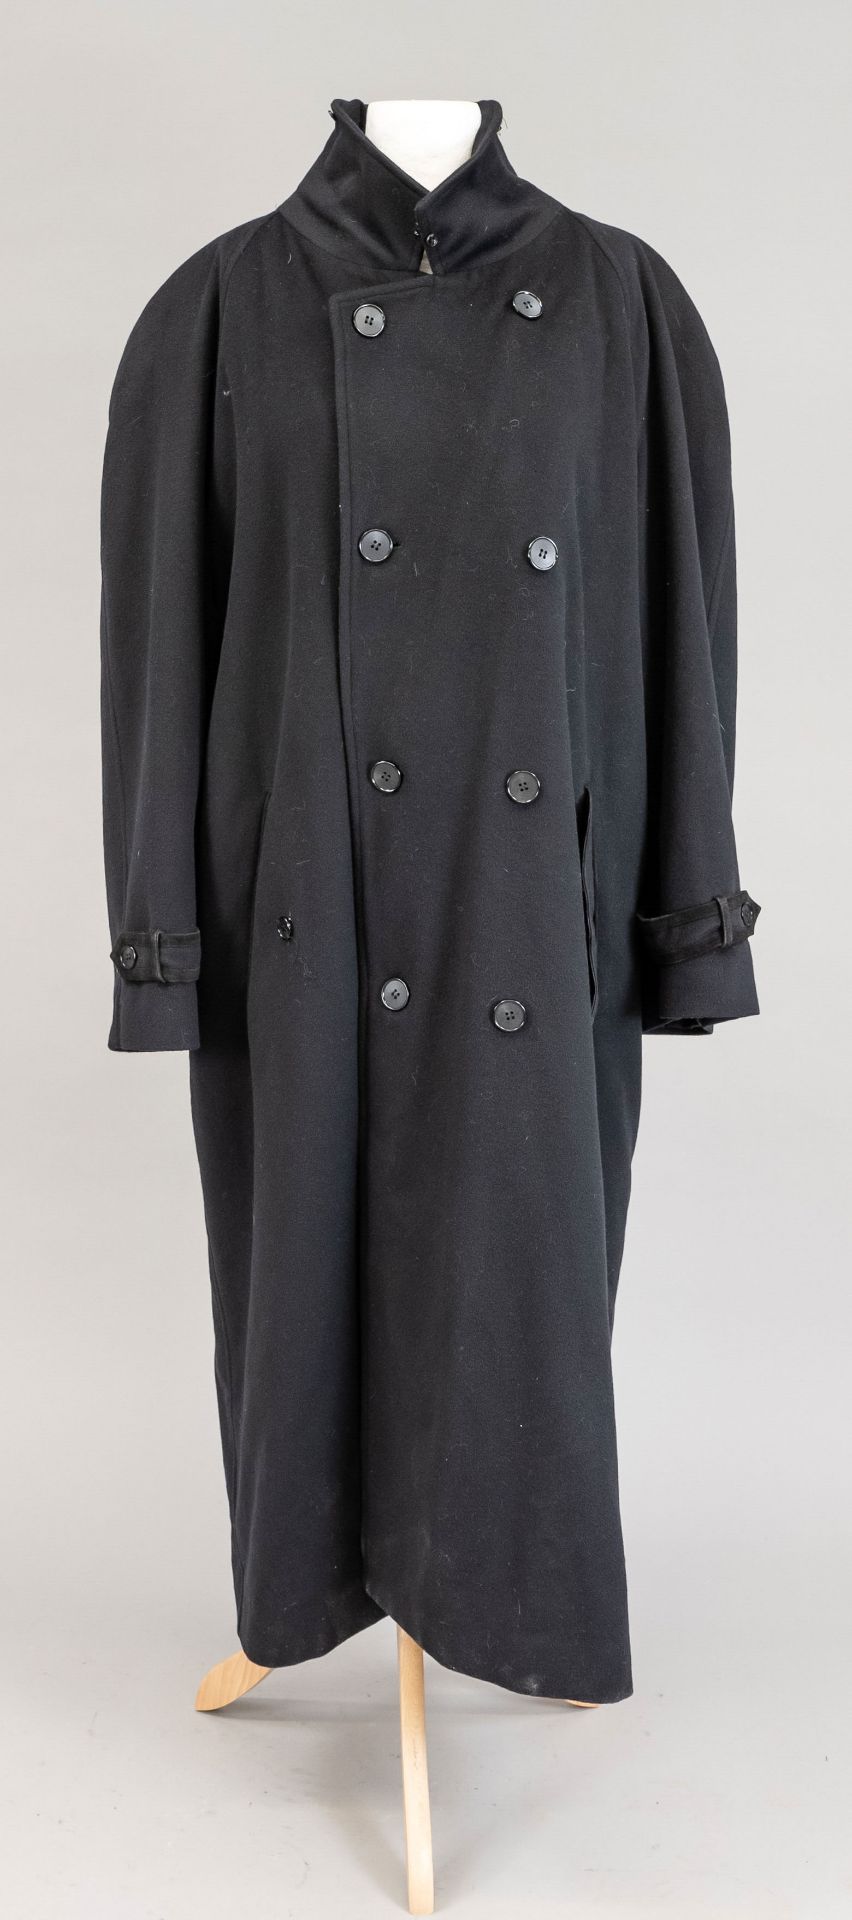 Unisex cashmere coat by Brioni, Italy, 2nd h. 20th c., Versace style silk lining, size 52, light